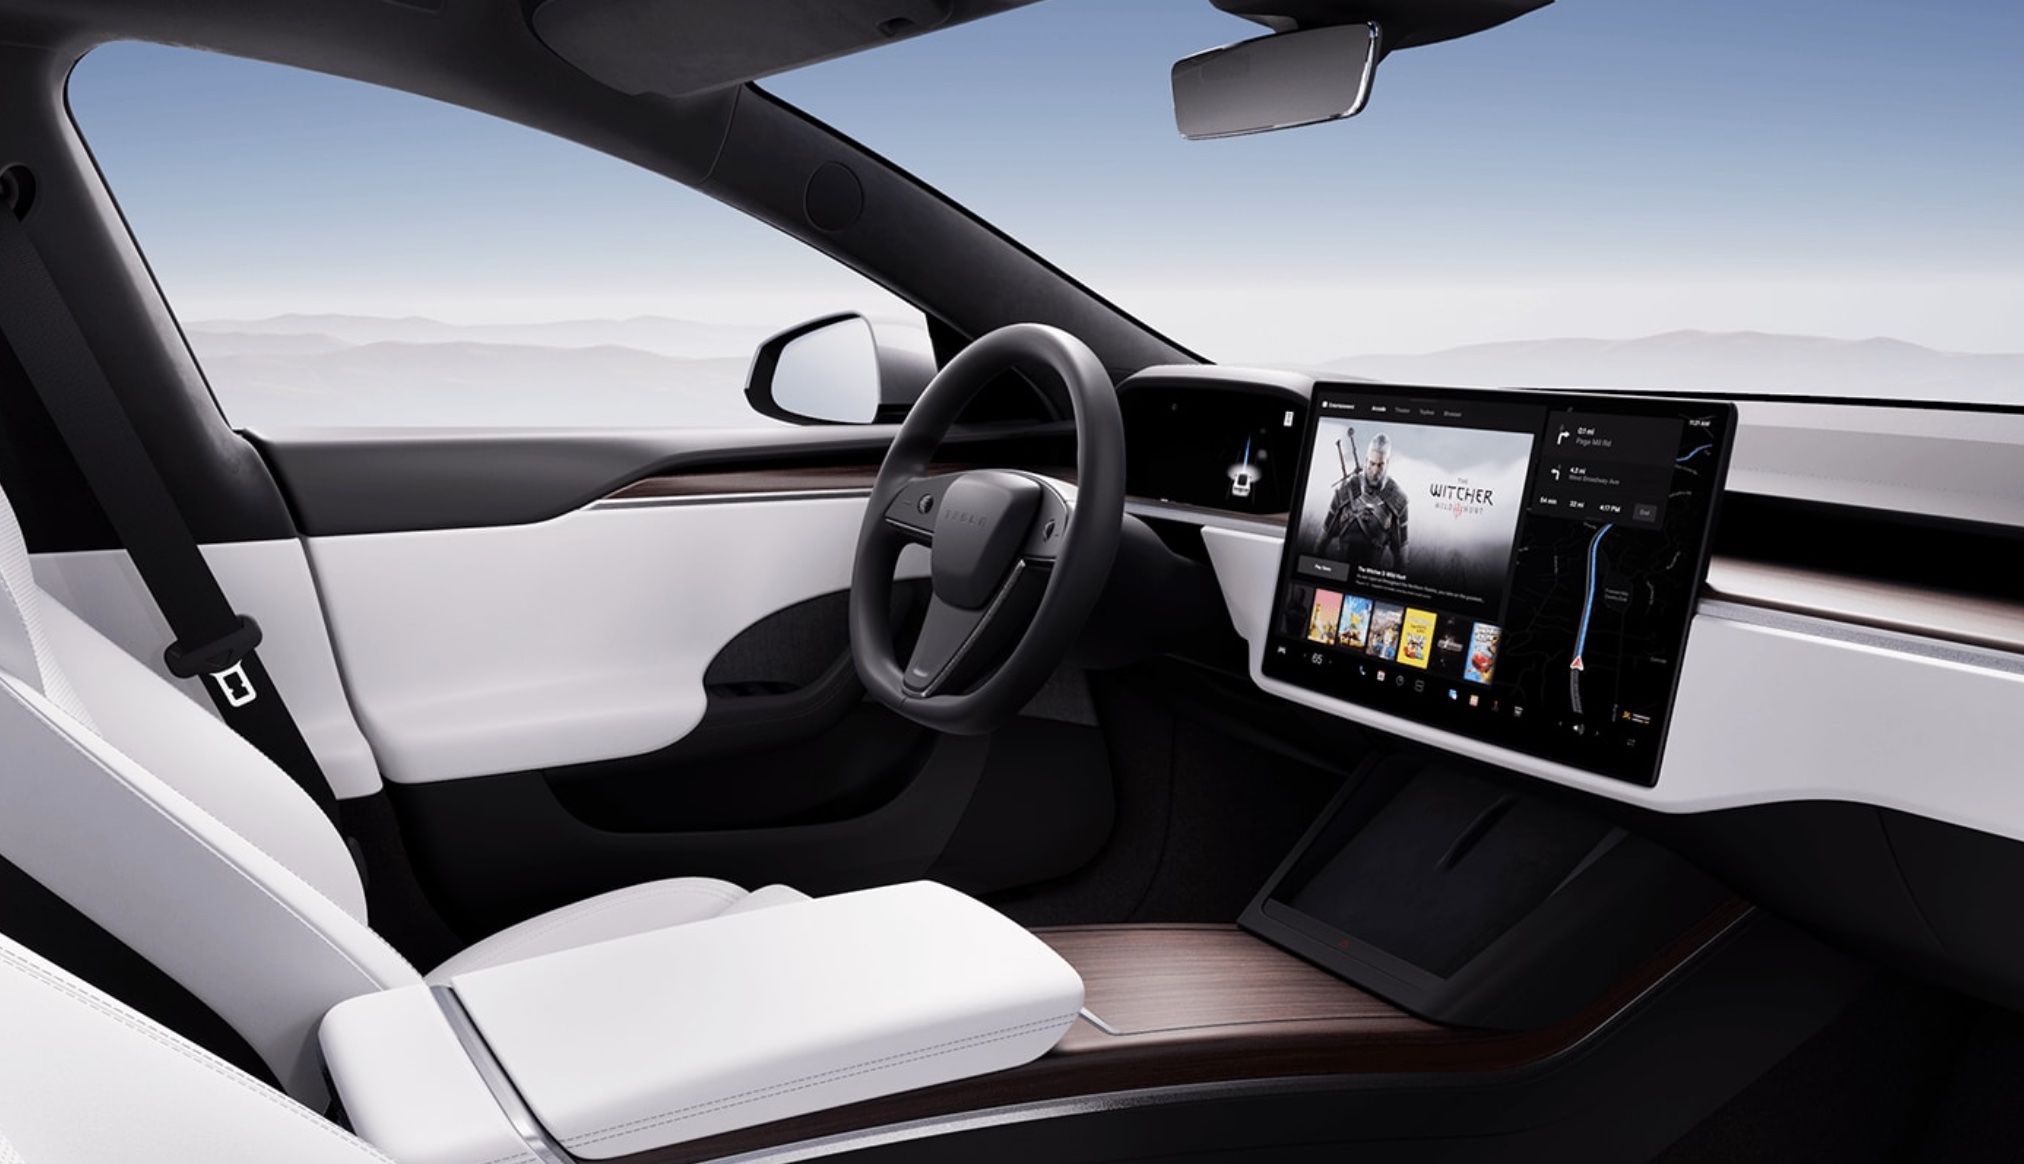 Tesla provides nifty local weather management function to enrich telephone calls